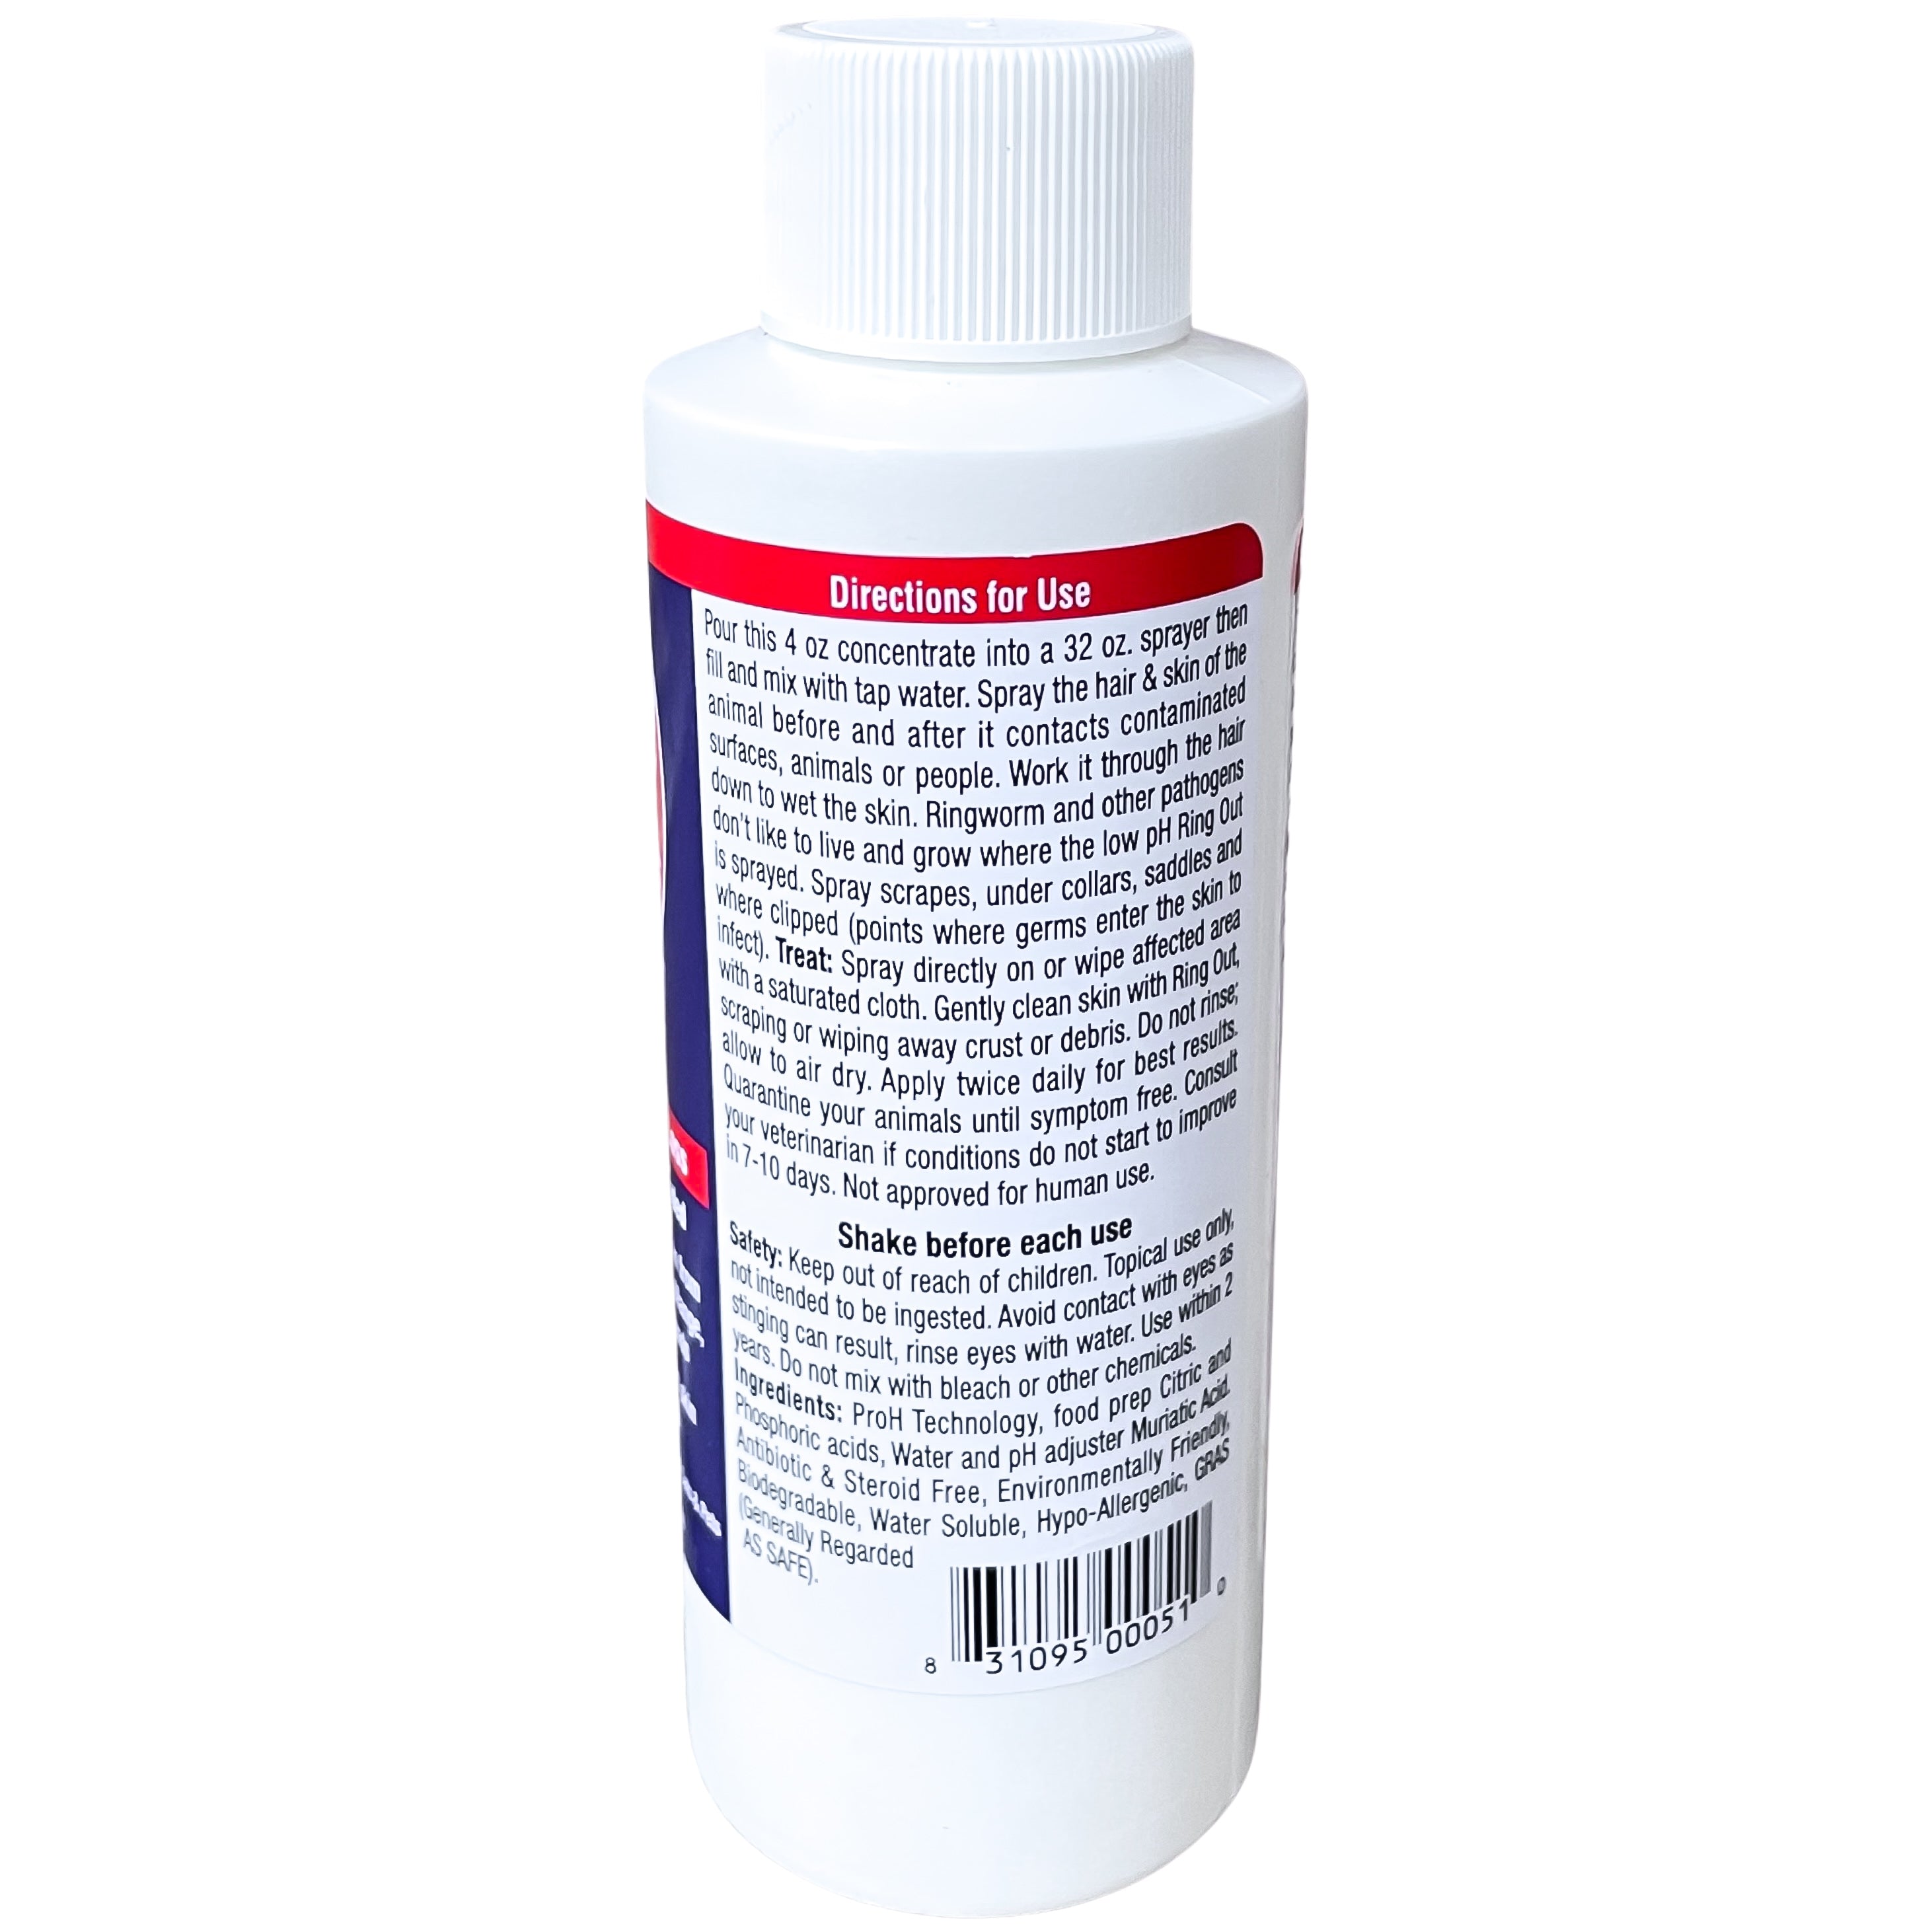 Ring Out - 2 bottles of Ring Out & 1 Sprayer - Prevent & Help Treat Ringworm & Fungus